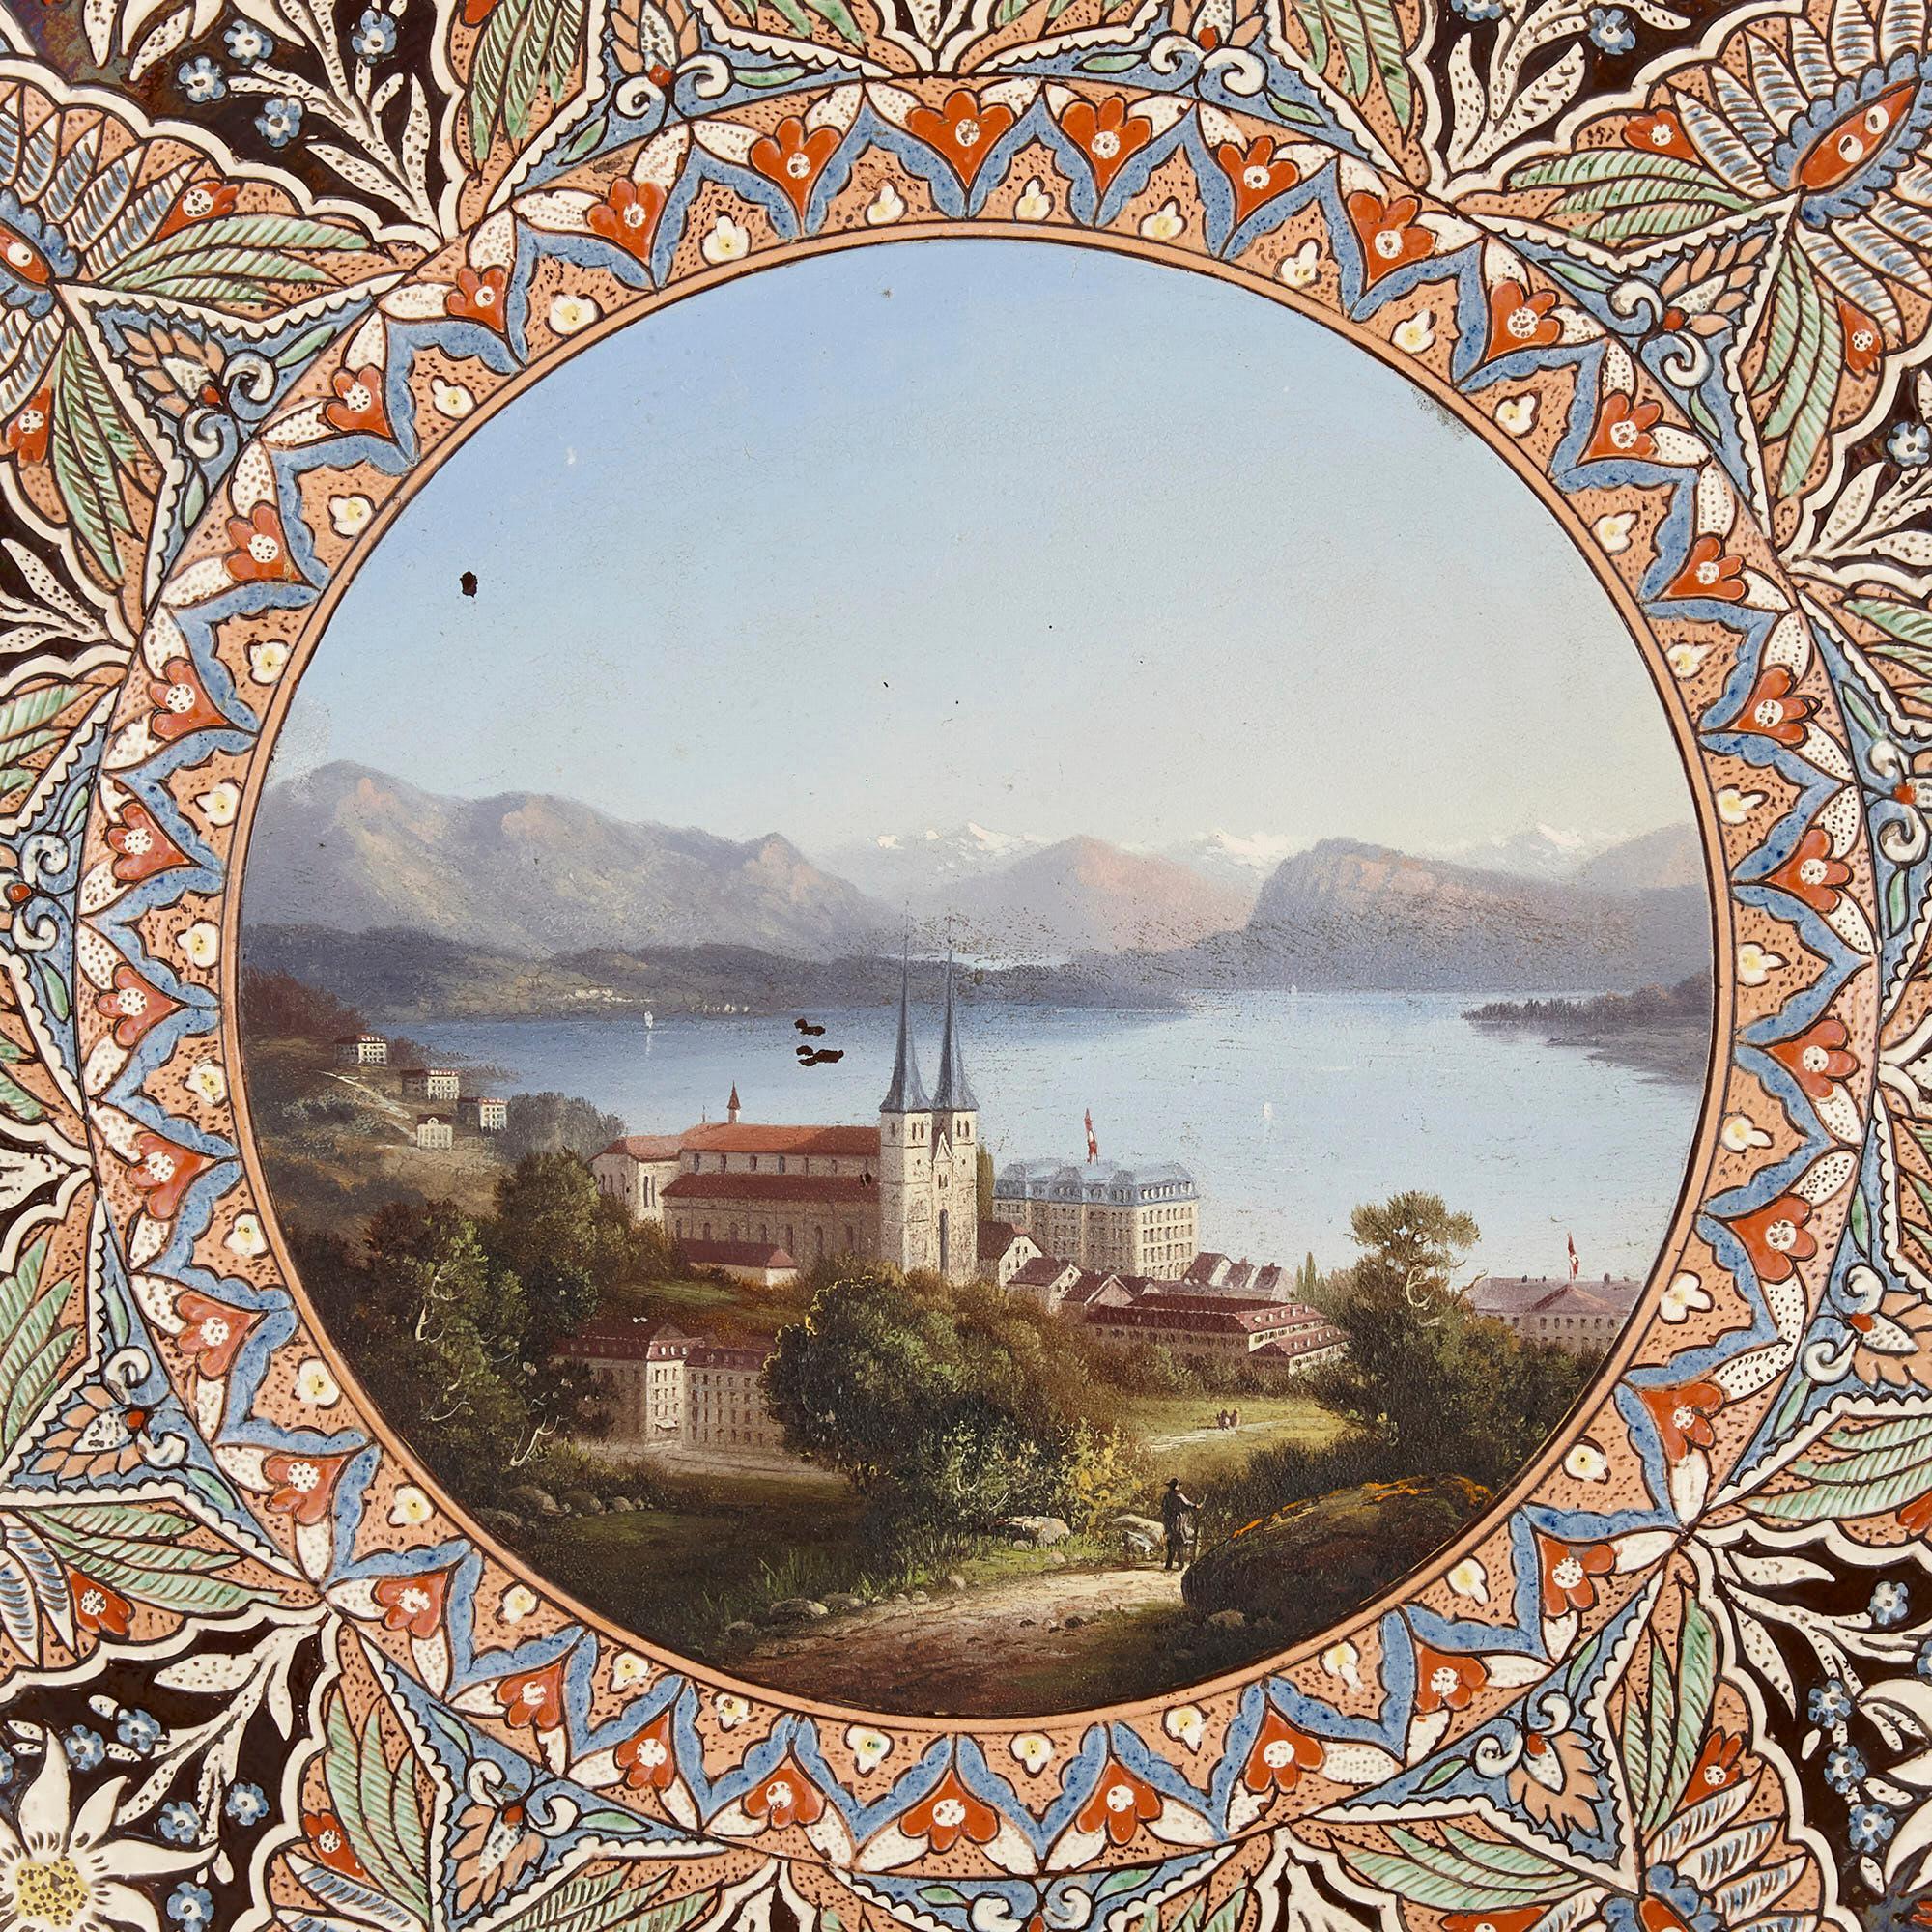 Swiss charger-shaped faience plaque depicting a lakeside chateau
Swiss, late 19th century
Measures: Frame: Depth 7cm, diameter 50cm
Plaque: Depth 4cm, diameter 39cm

This beautiful framed faience charger is superbly decorated with a variety of